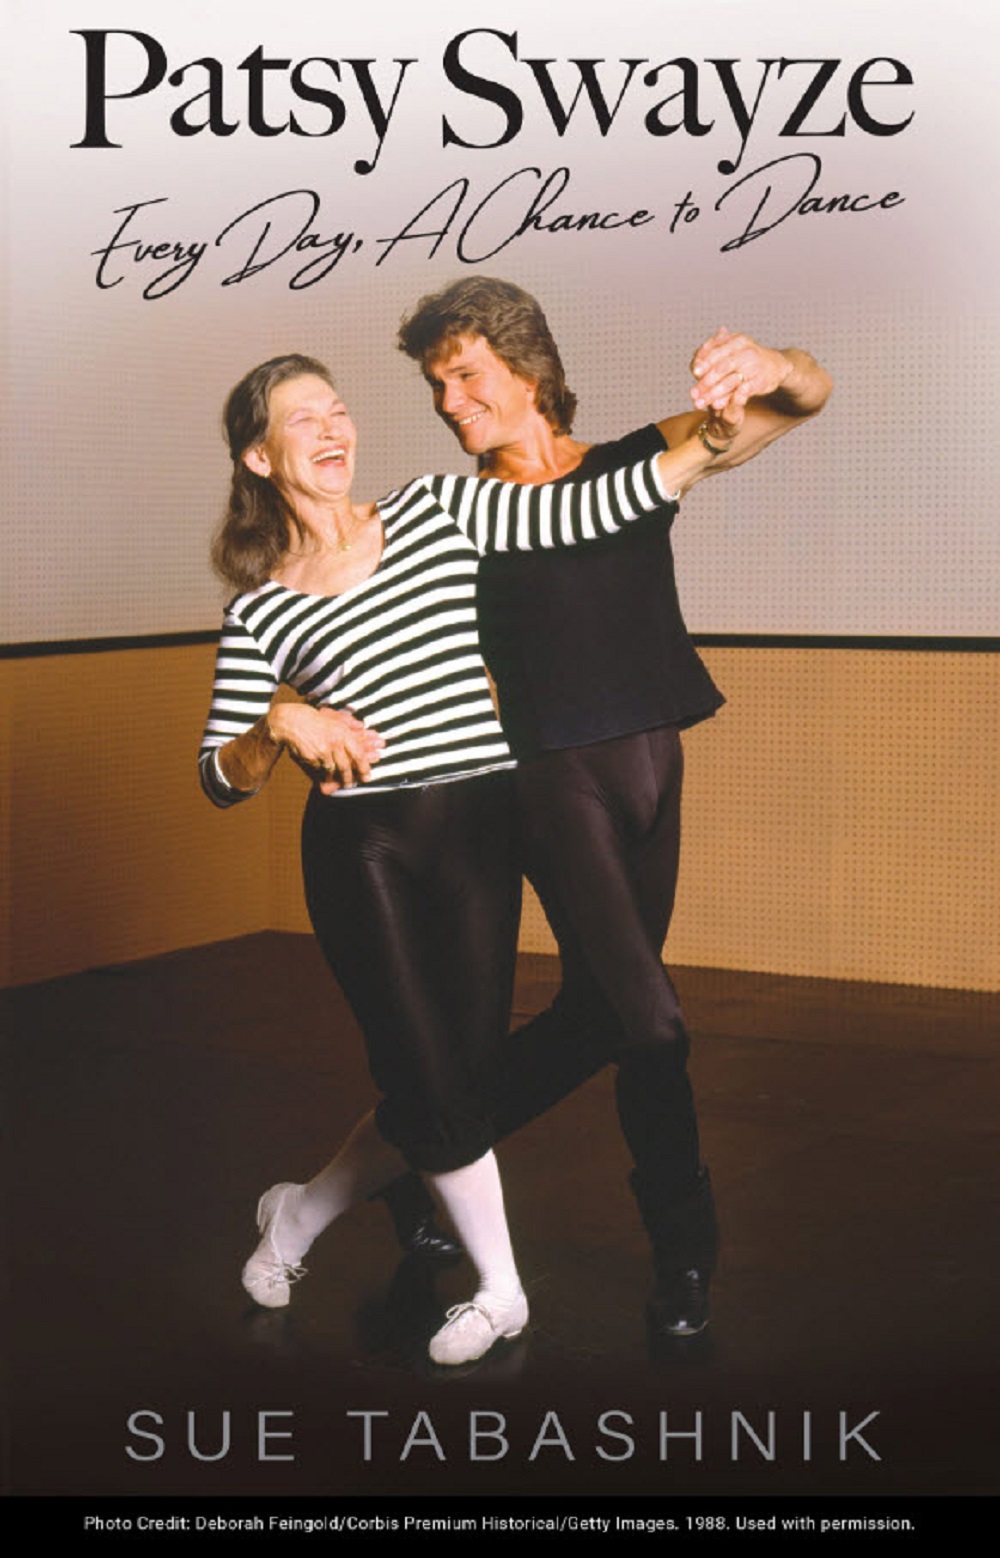 Patsy Swayze: Every Day, A Chance to Dance, tells the story of Patrick Swayze's mother and mentor